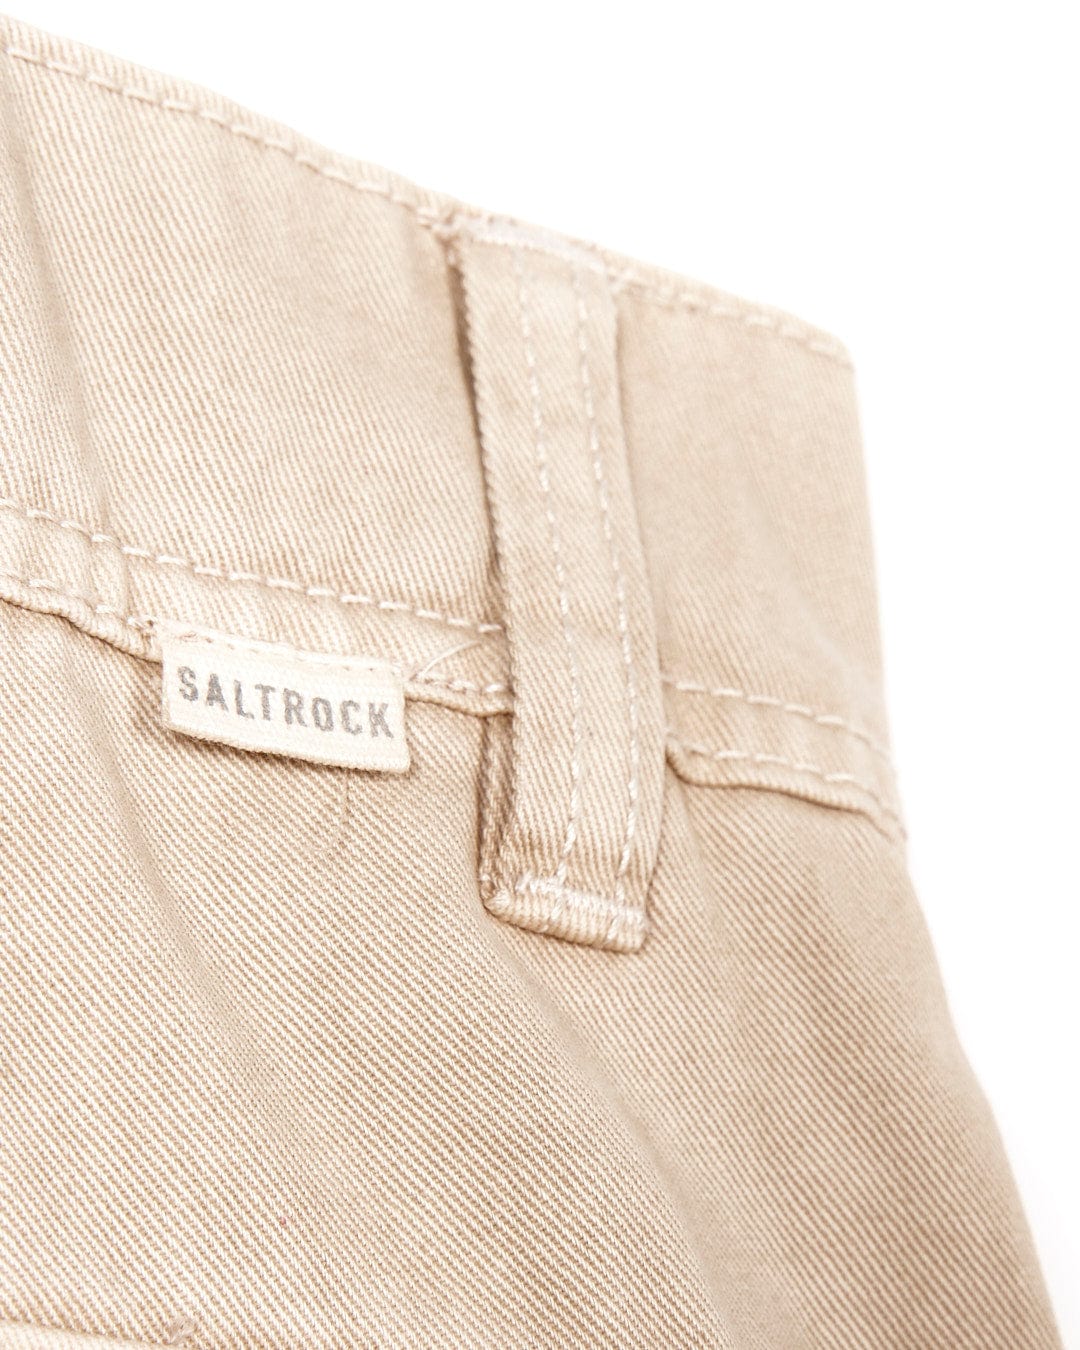 A pair of Godrevy - Mens Cargo Trouser - Sand with the brand name Saltrock on them.